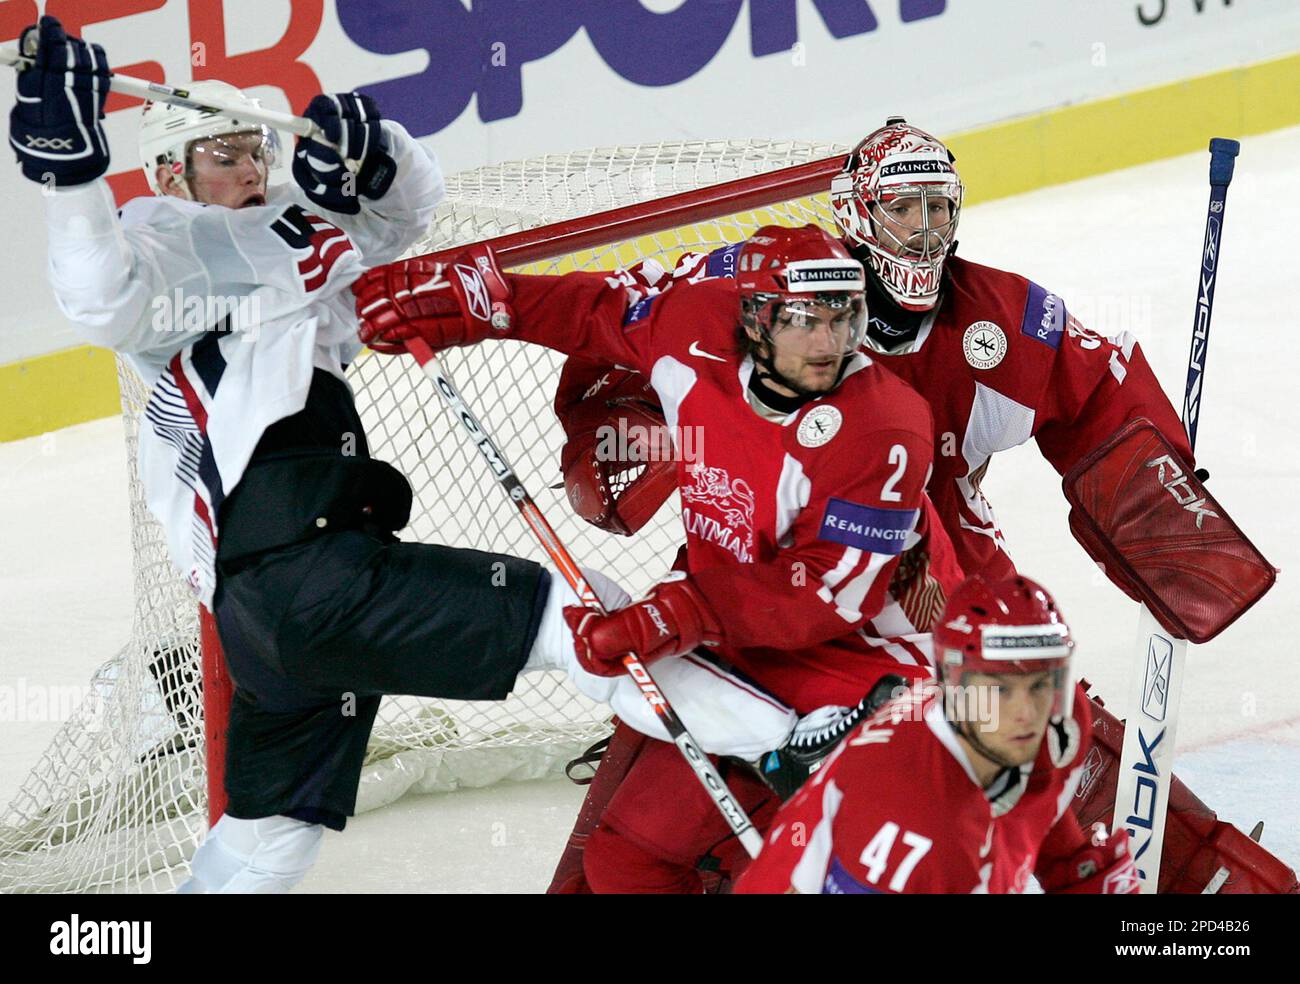 Adam Hall,of the United States, left, struggles with Denmarks defender Rasmus Pander, center, as Denmarks Thomas Johnsen, right, and Peter Hirsch, second right, watch the puck, unseen, during their IIHF Ice Hockey